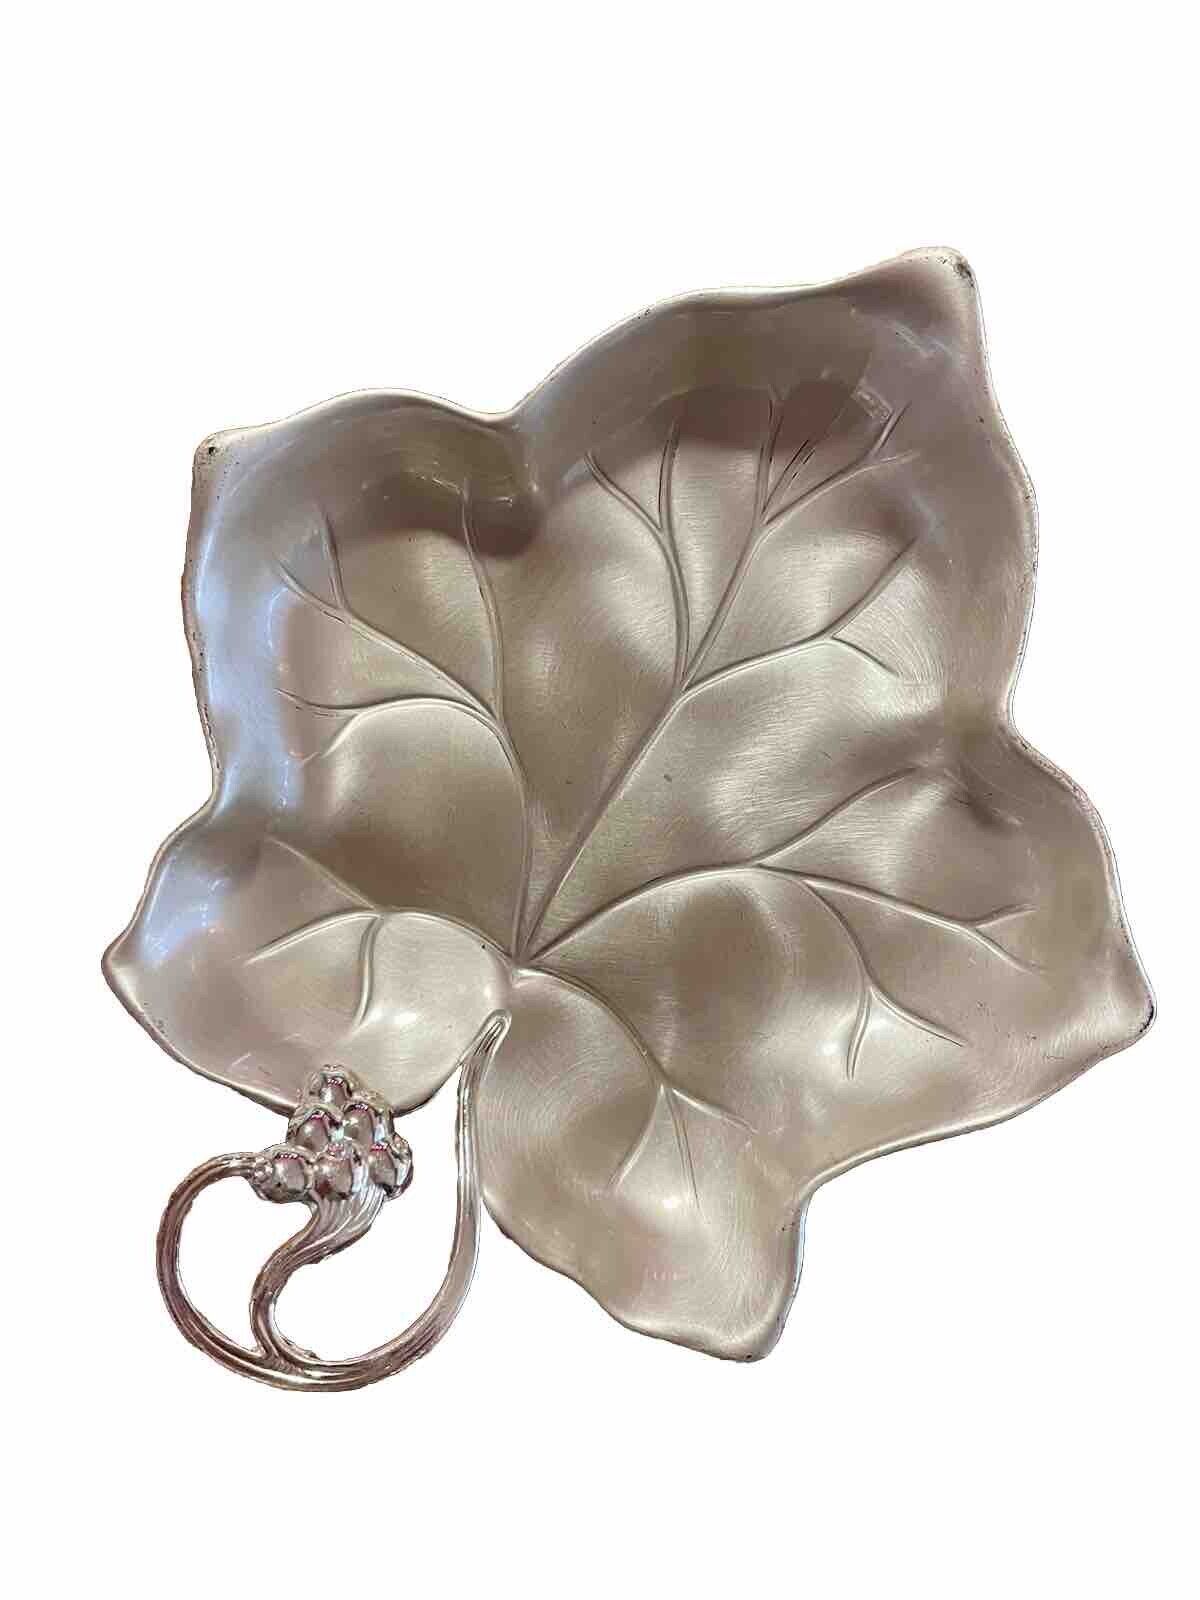 LEAF CANDY DISH - WMF-IKORA / MADE IN GERMANY  Gently Used 😍